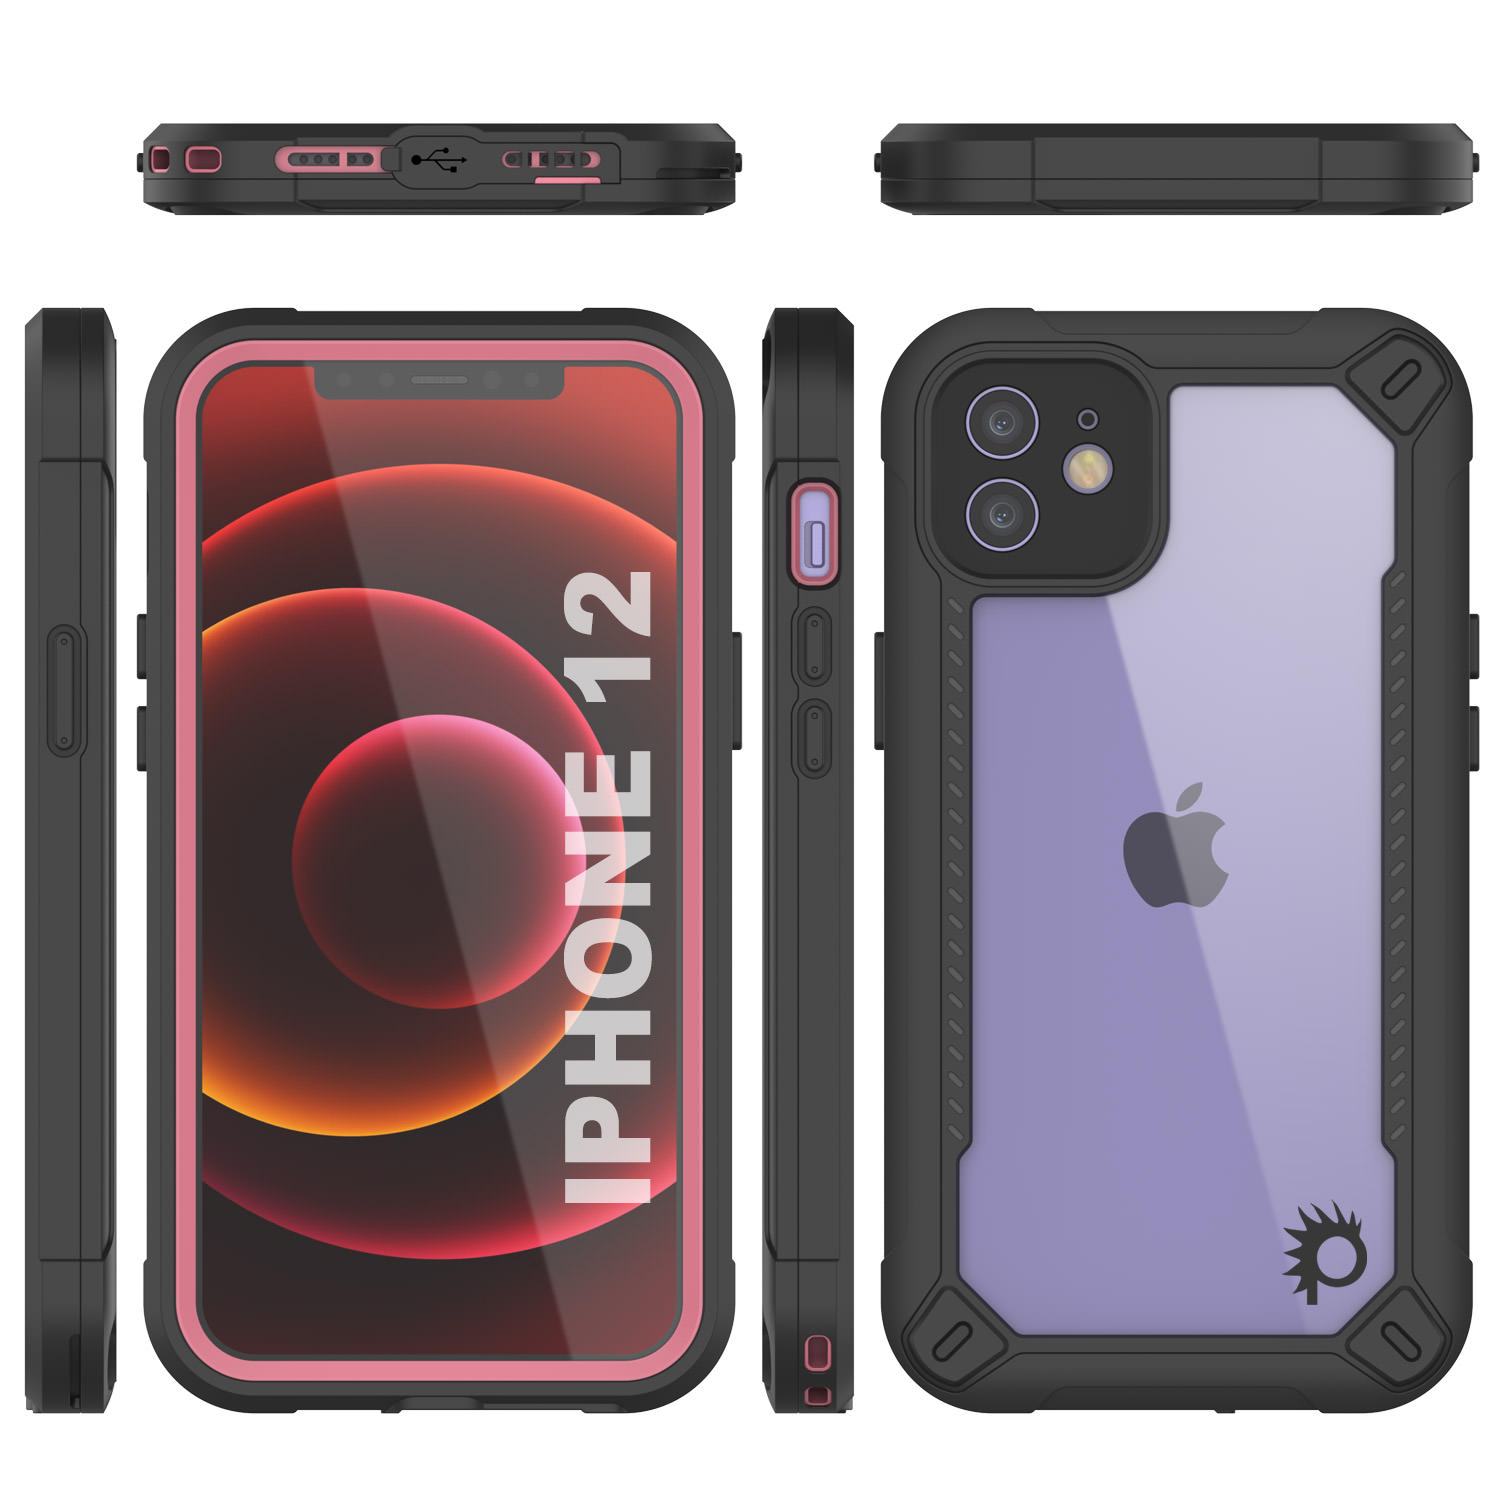 iPhone 12 Waterproof IP68 Case, Punkcase [pink]  [Maximus Series] [Slim Fit] [IP68 Certified] [Shockresistant] Clear Armor Cover with Screen Protector | Ultimate Protection